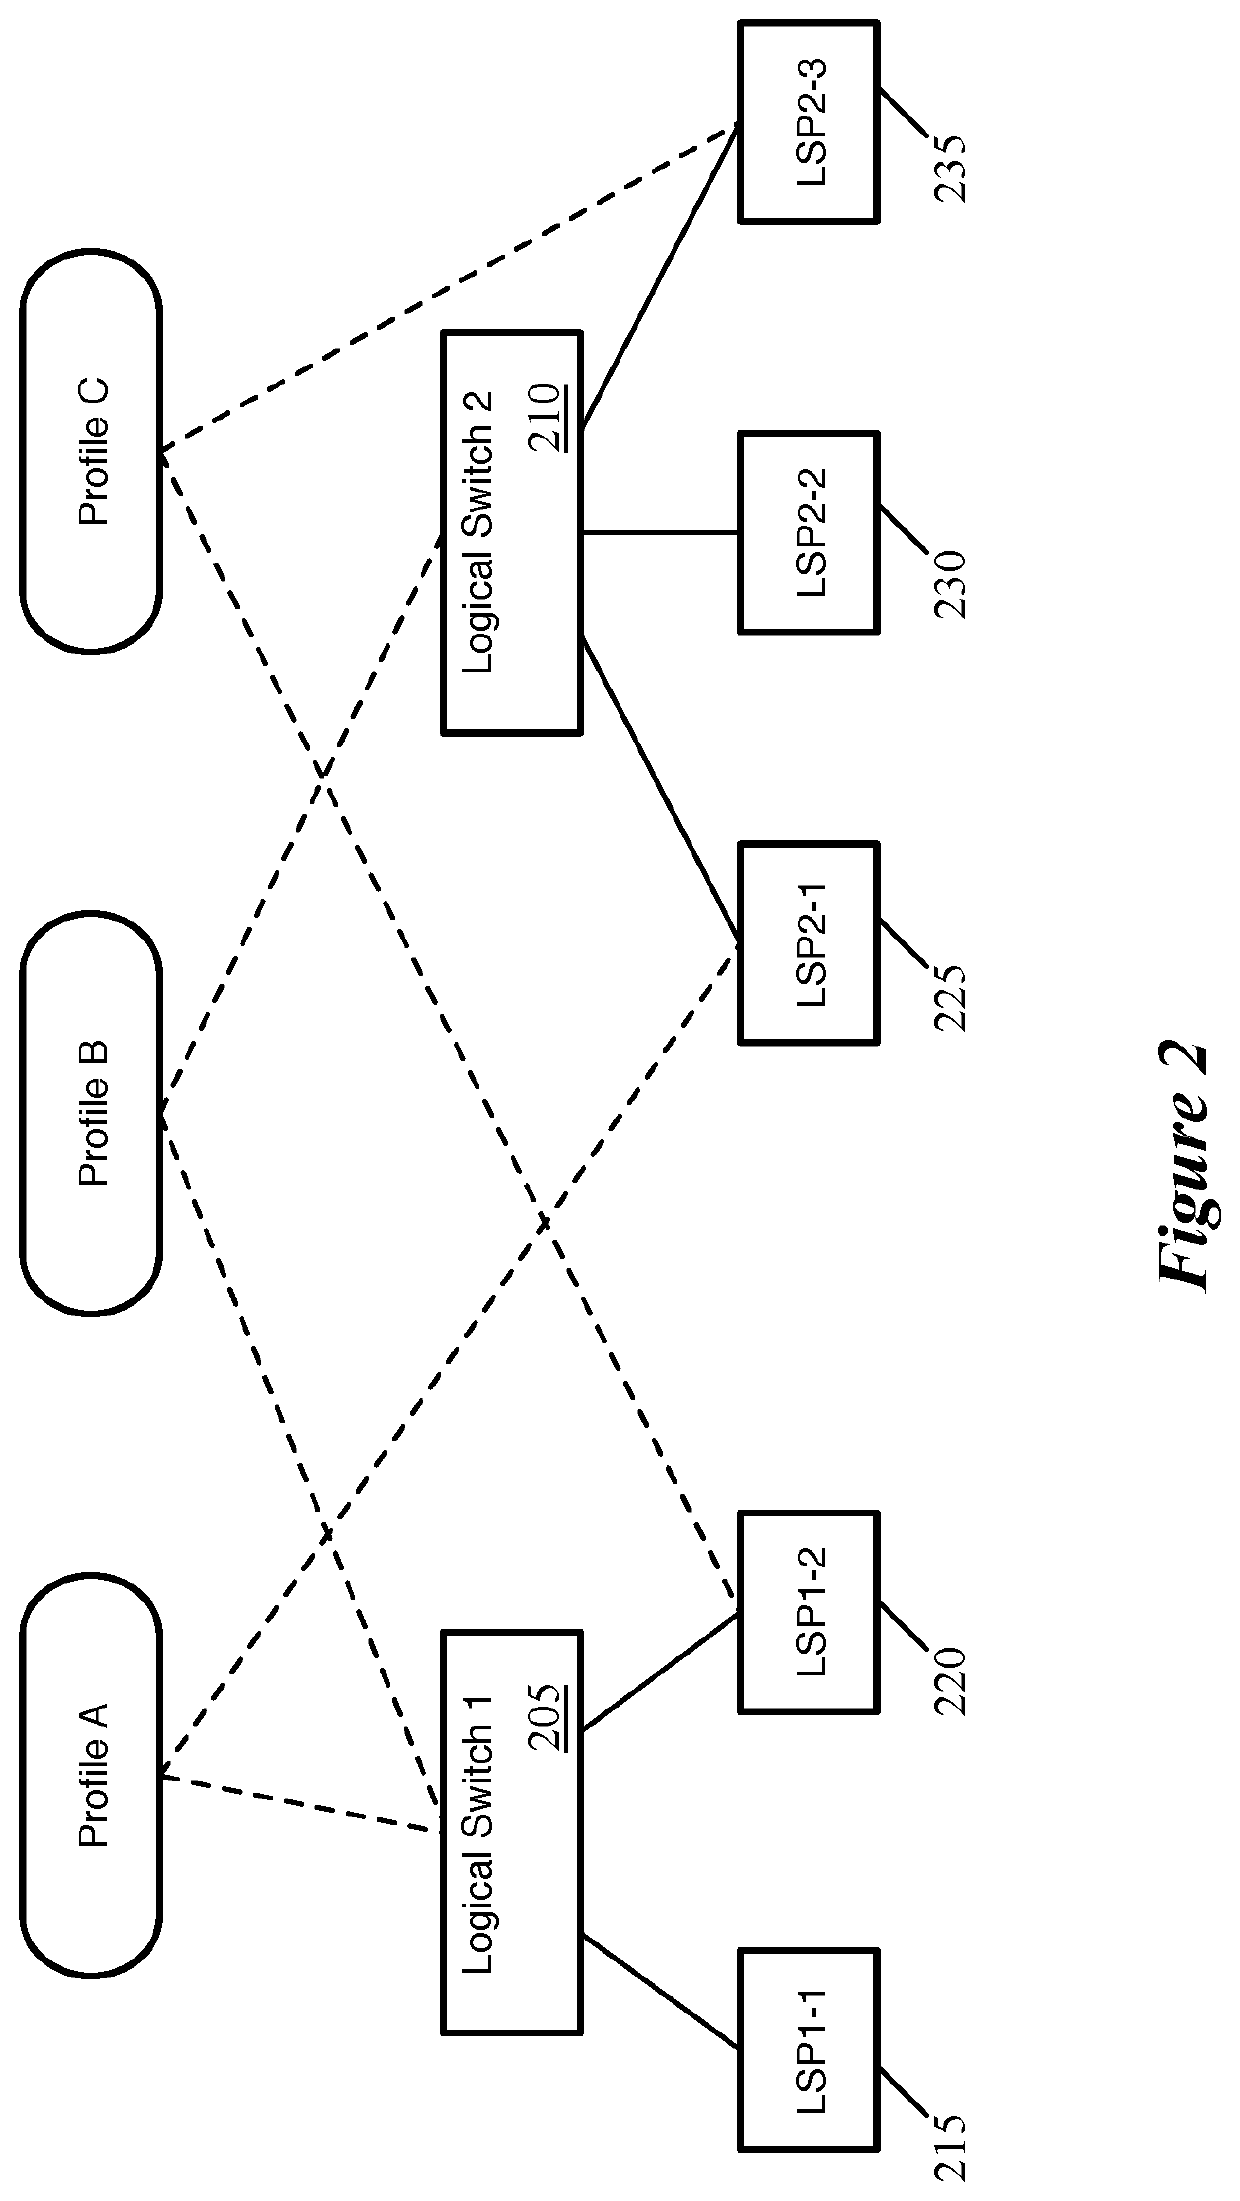 Application of profile setting groups to logical network entities